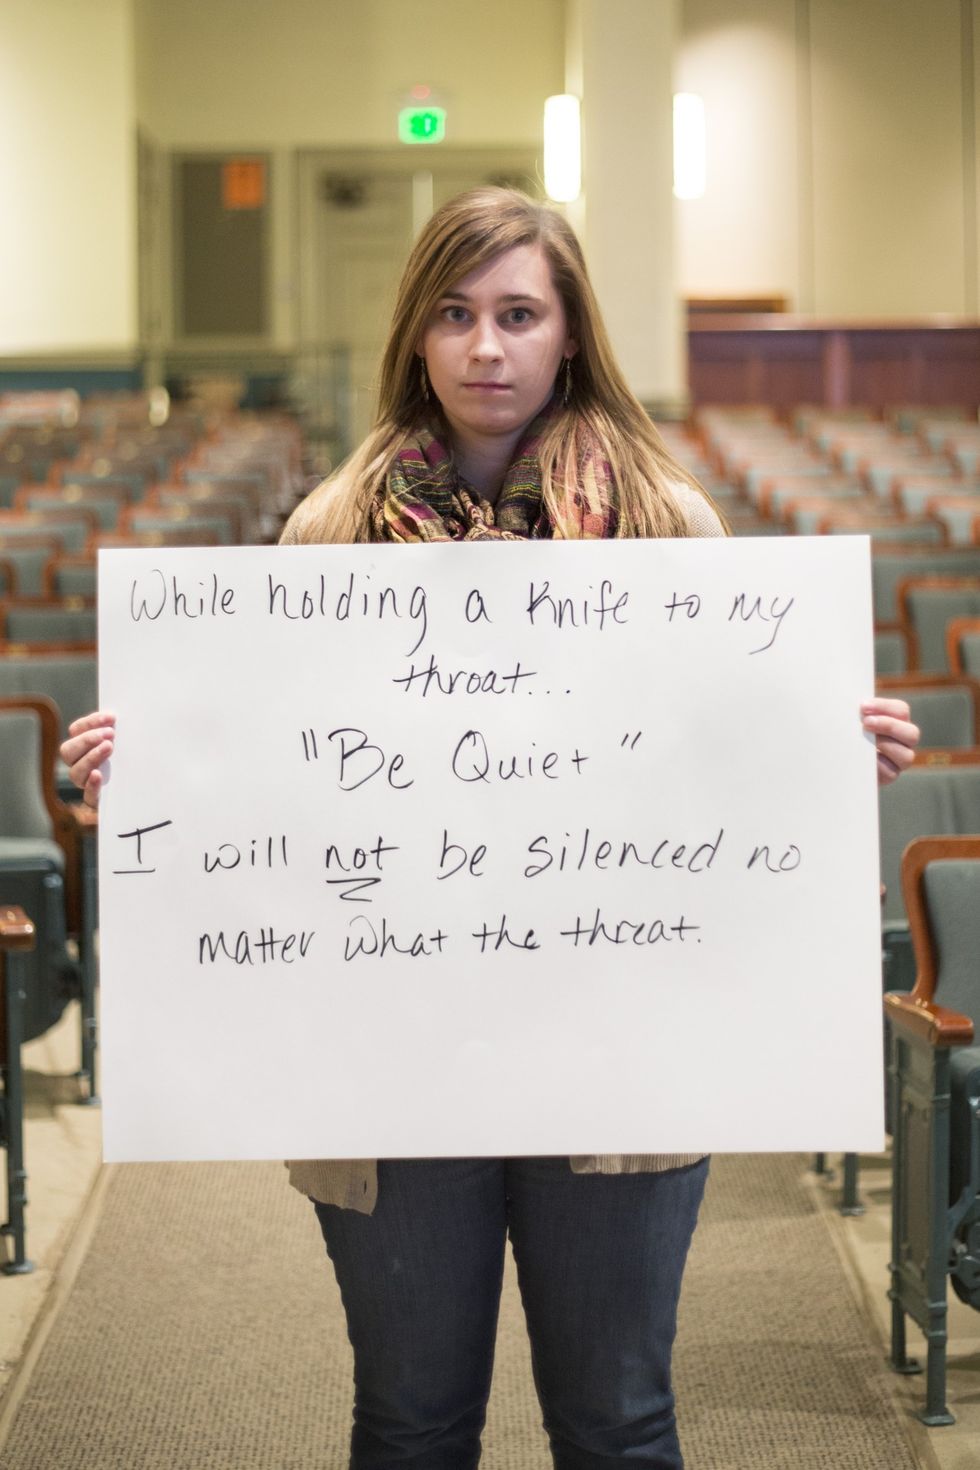 Brave women are photographed with signs quoting the terrifying words of their abusers